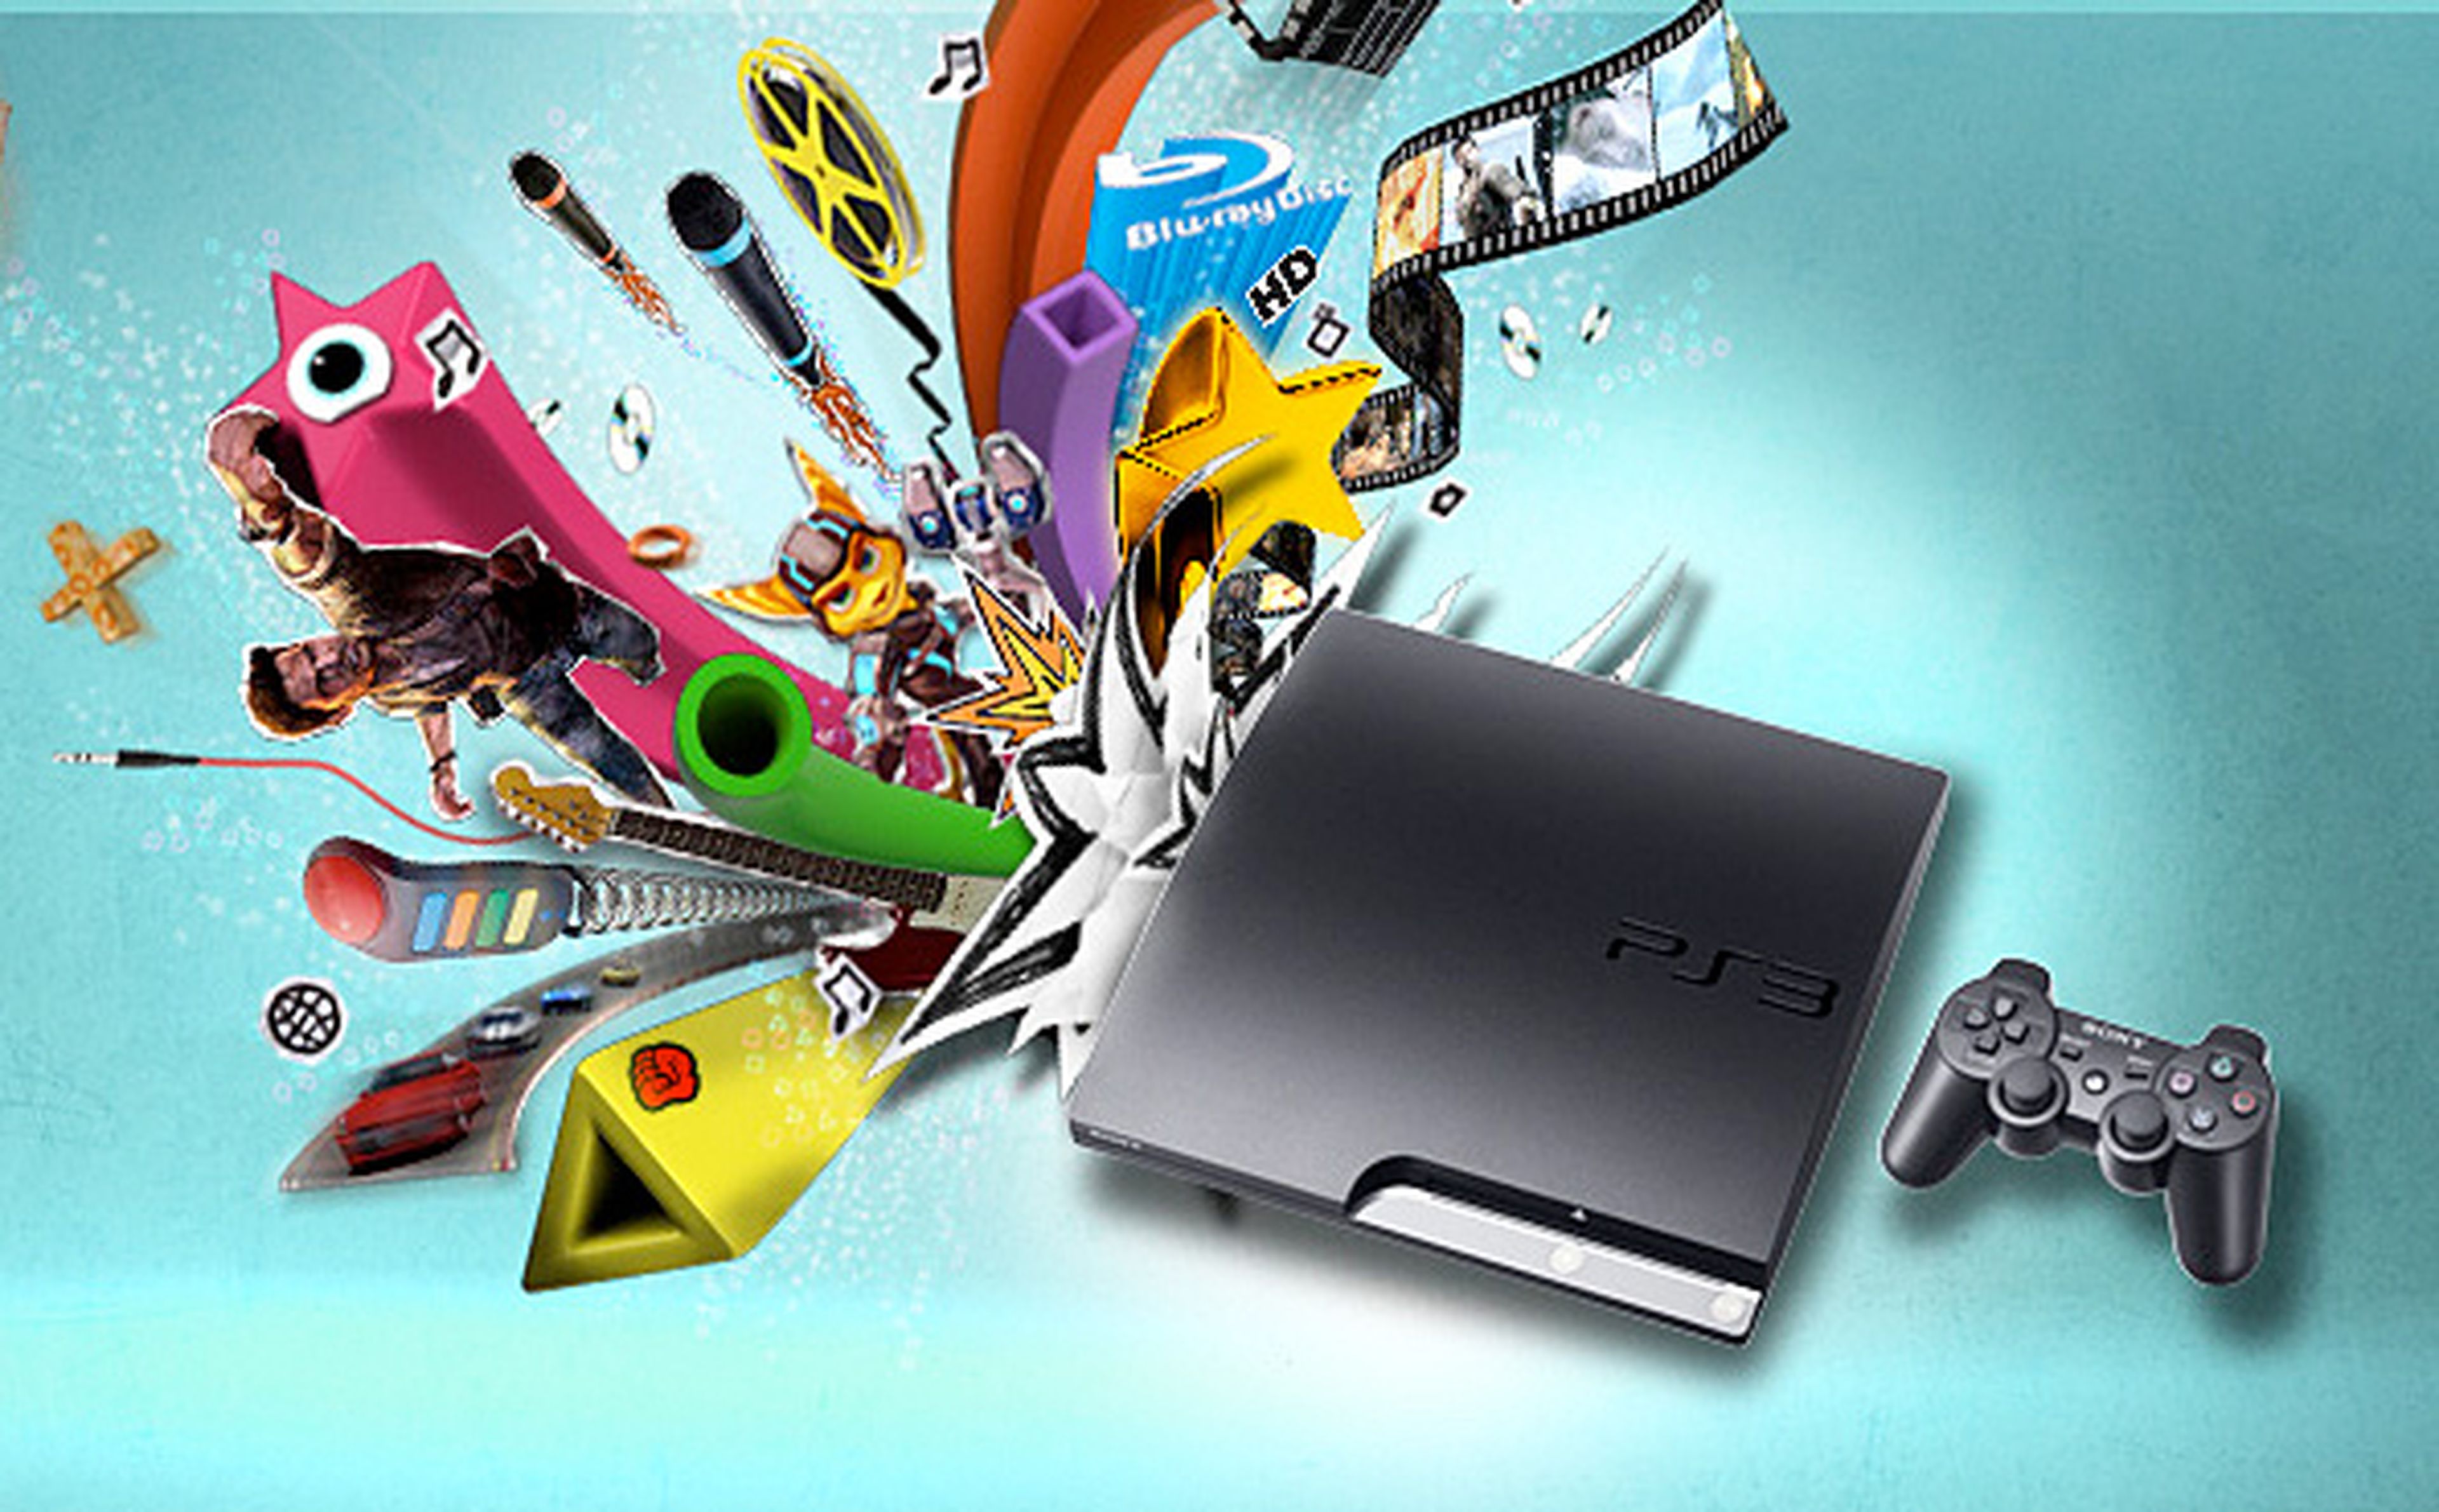 Filmy se une a PlayStation 3